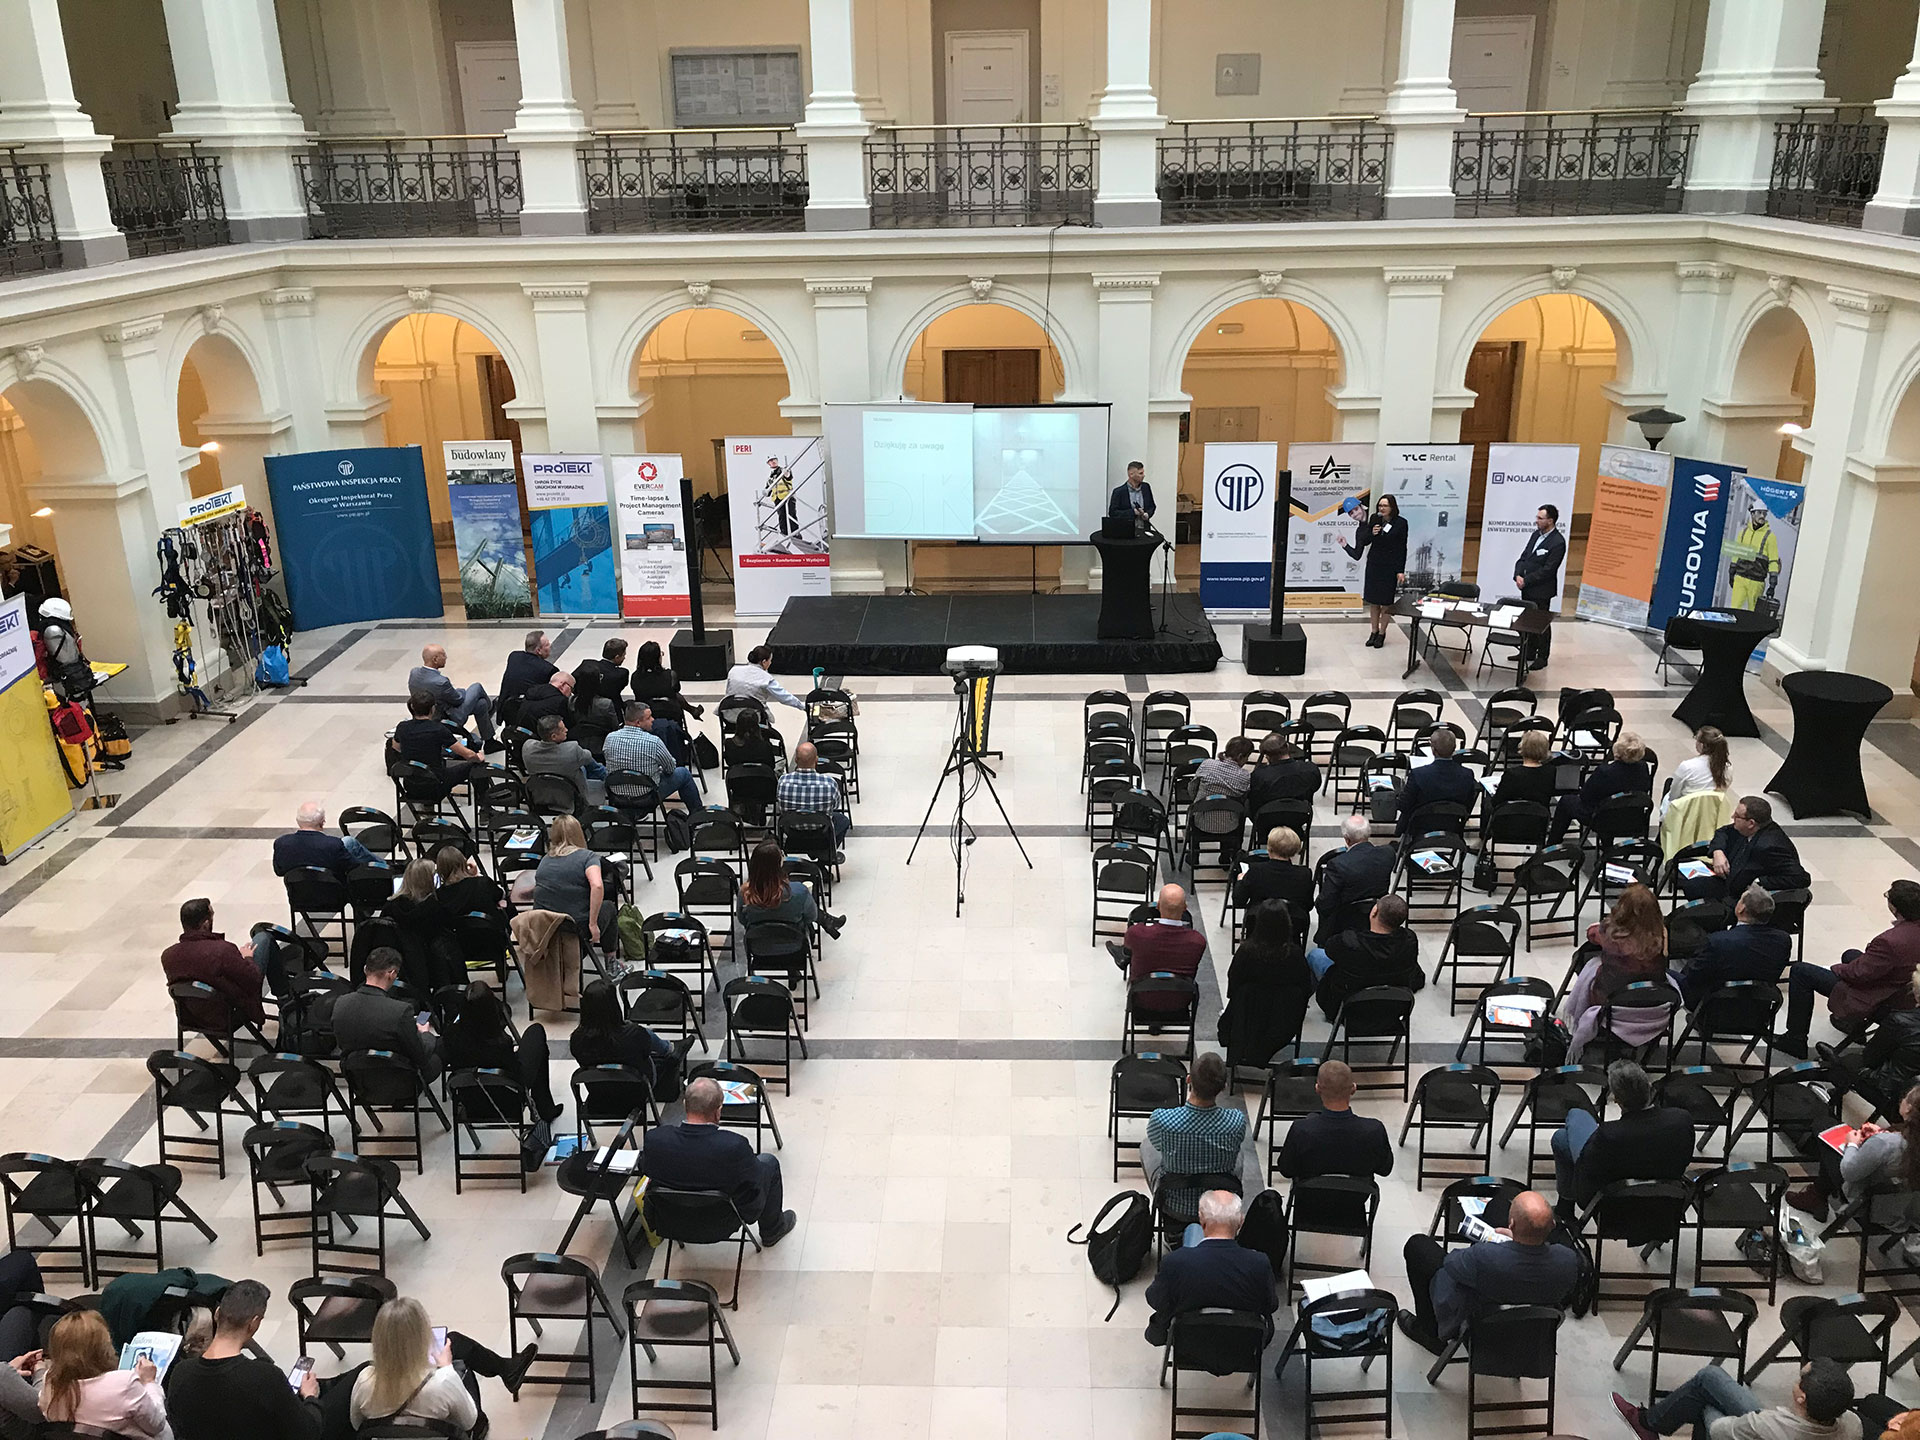 Conference at the Warsaw University of Technology